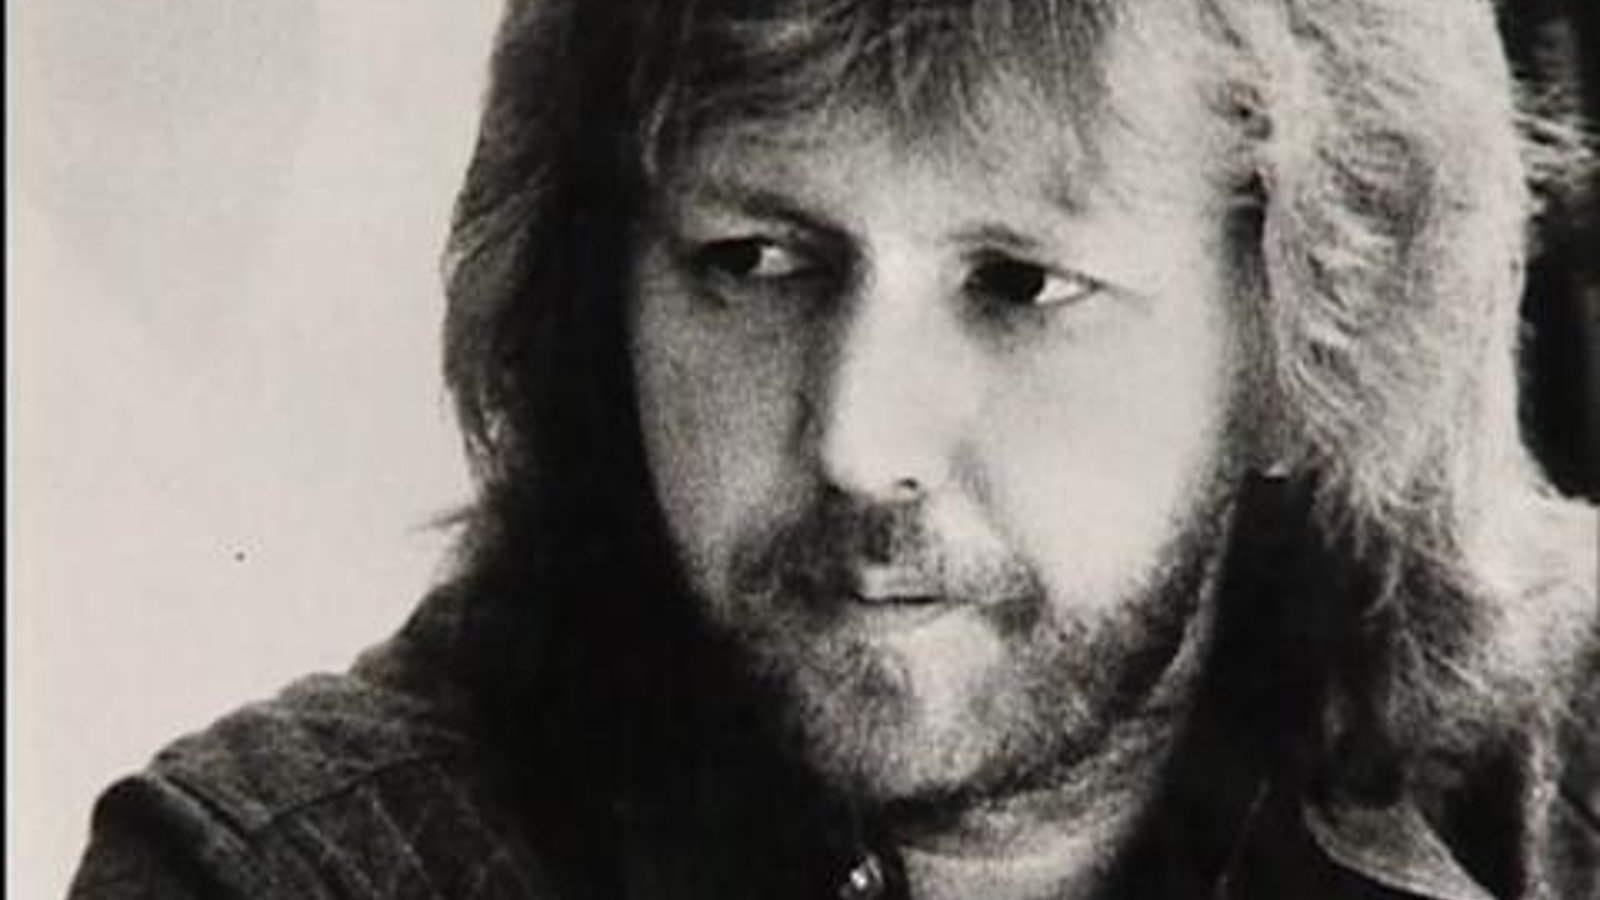 Who Is Harry Nilsson?